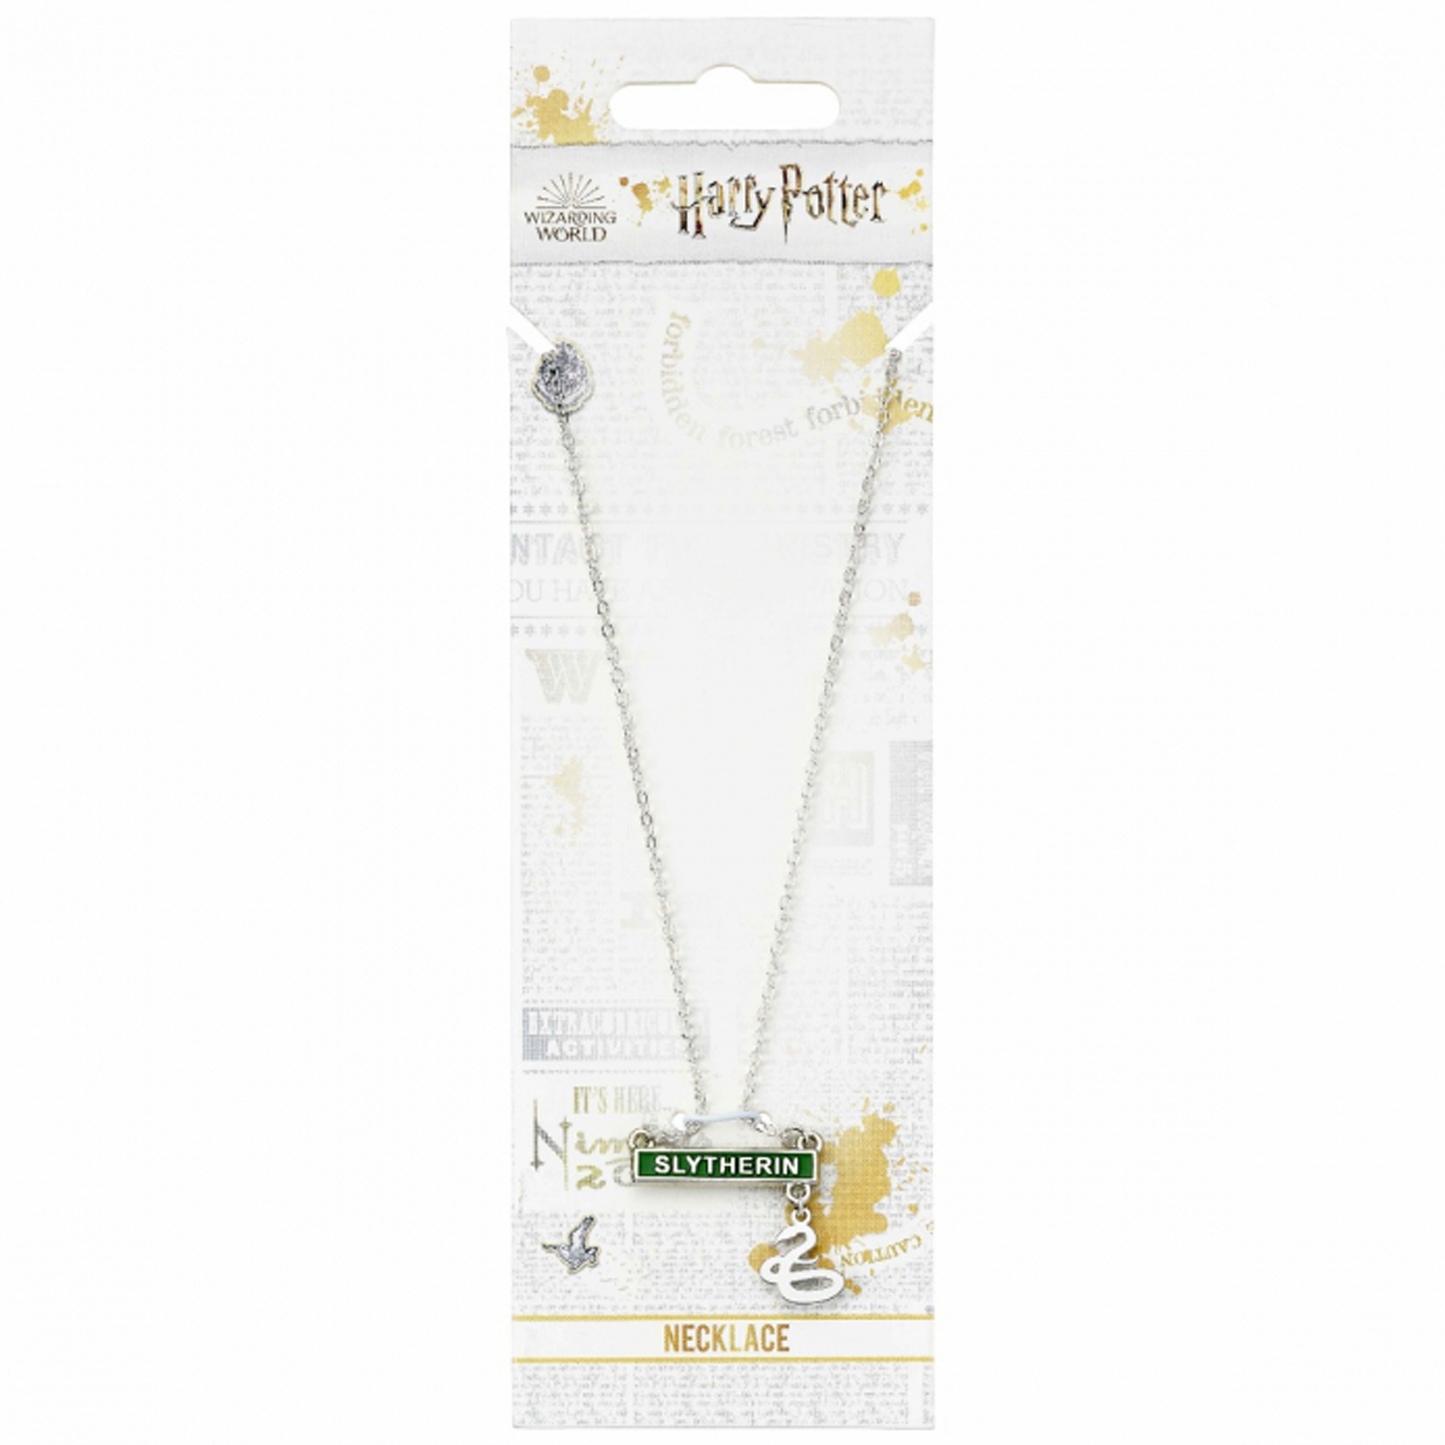 Slytherin - Harry Potter Hogwarts House Bar Necklace (in Packaging) | Happy Piranha